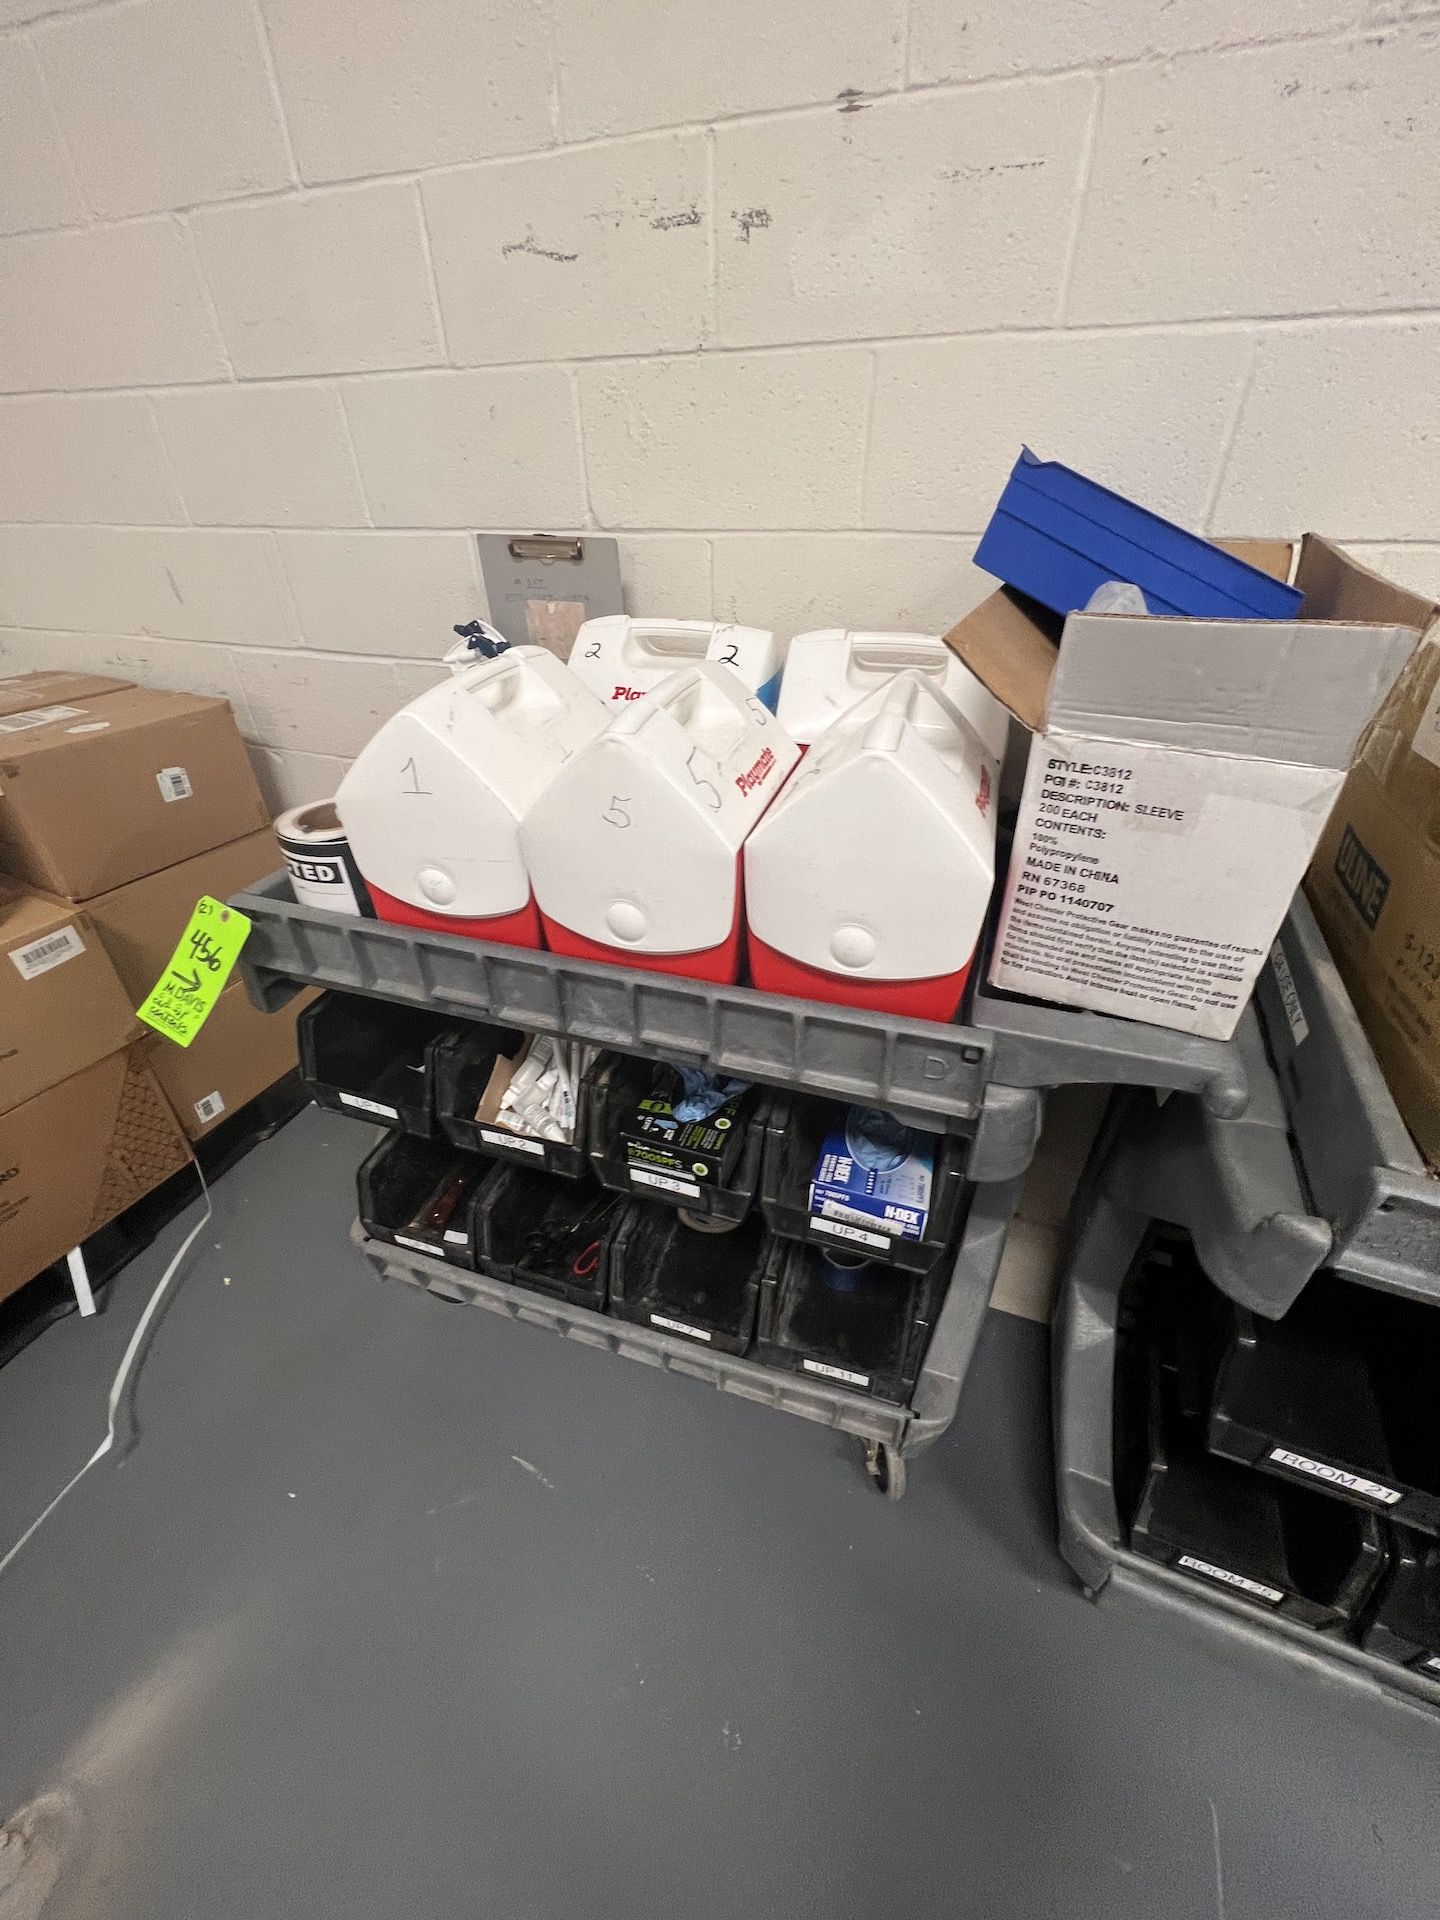 LABORATORY SUPPLIES ON TWO PUSH CARTS, INCLUDES PUSH CARTS - Image 6 of 8